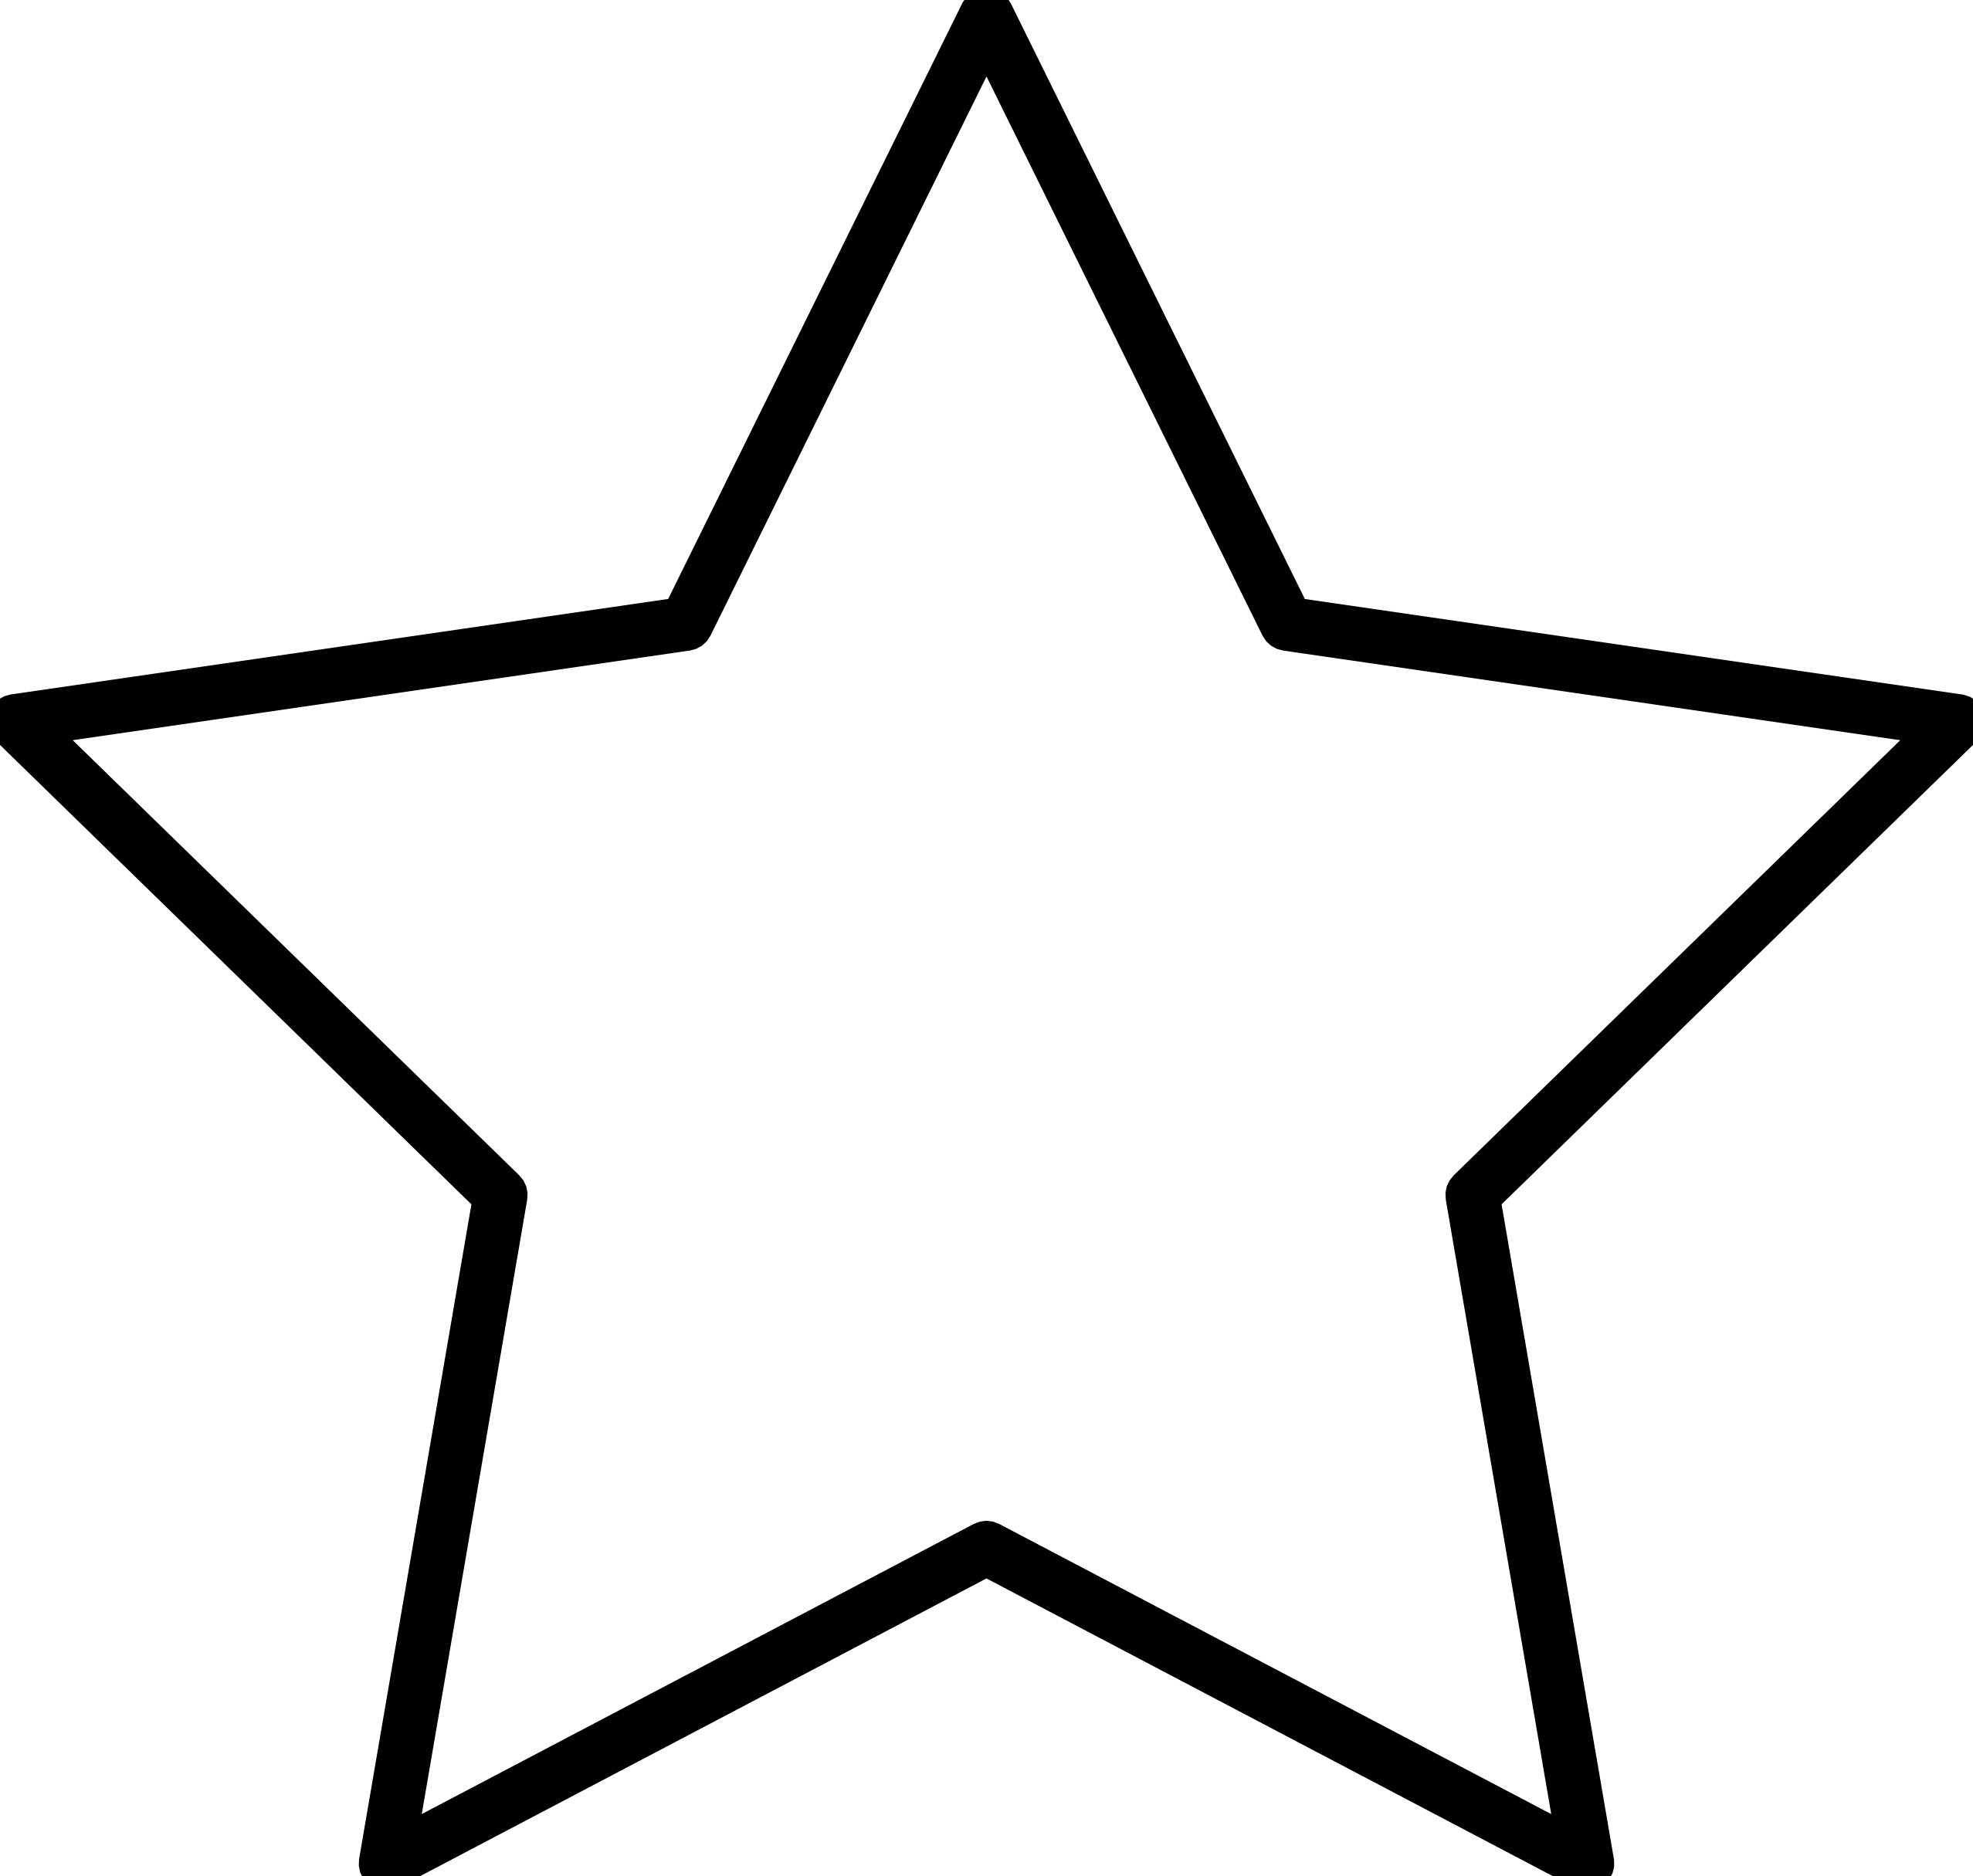 Gold Rounded Star